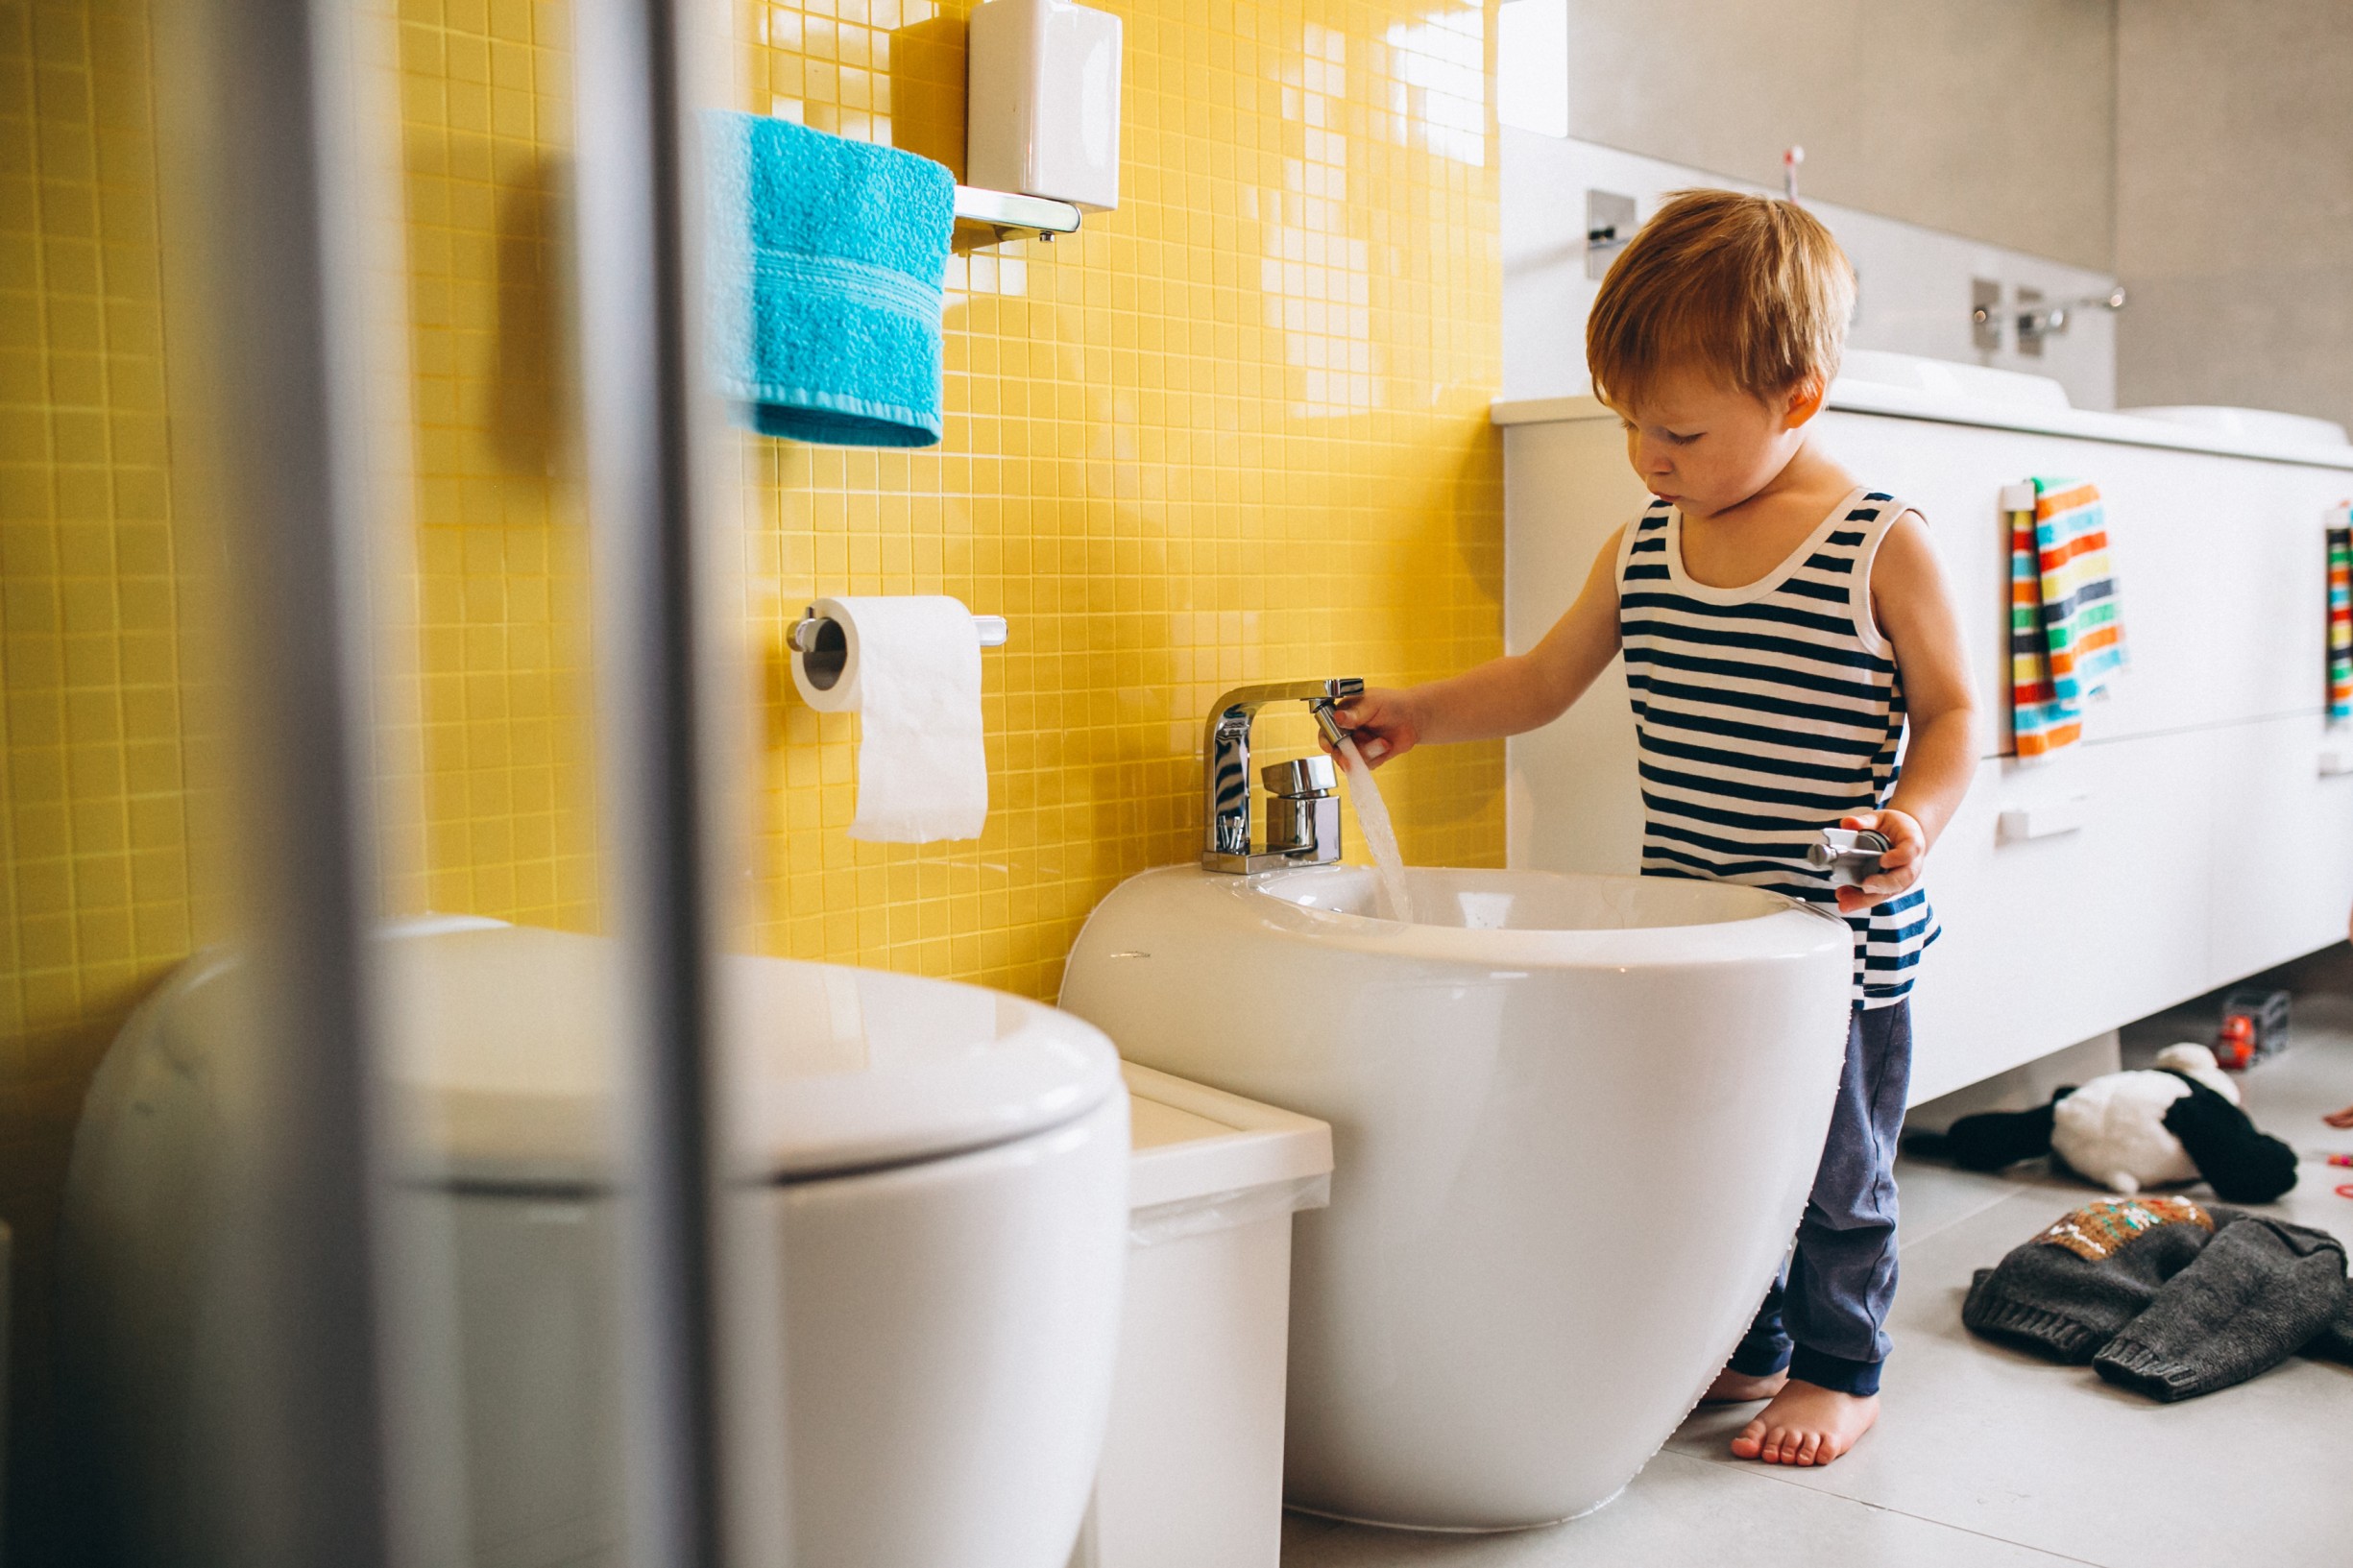 How Can a Toilet Training Toy Help Young Children Learn Toilet Etiquette?